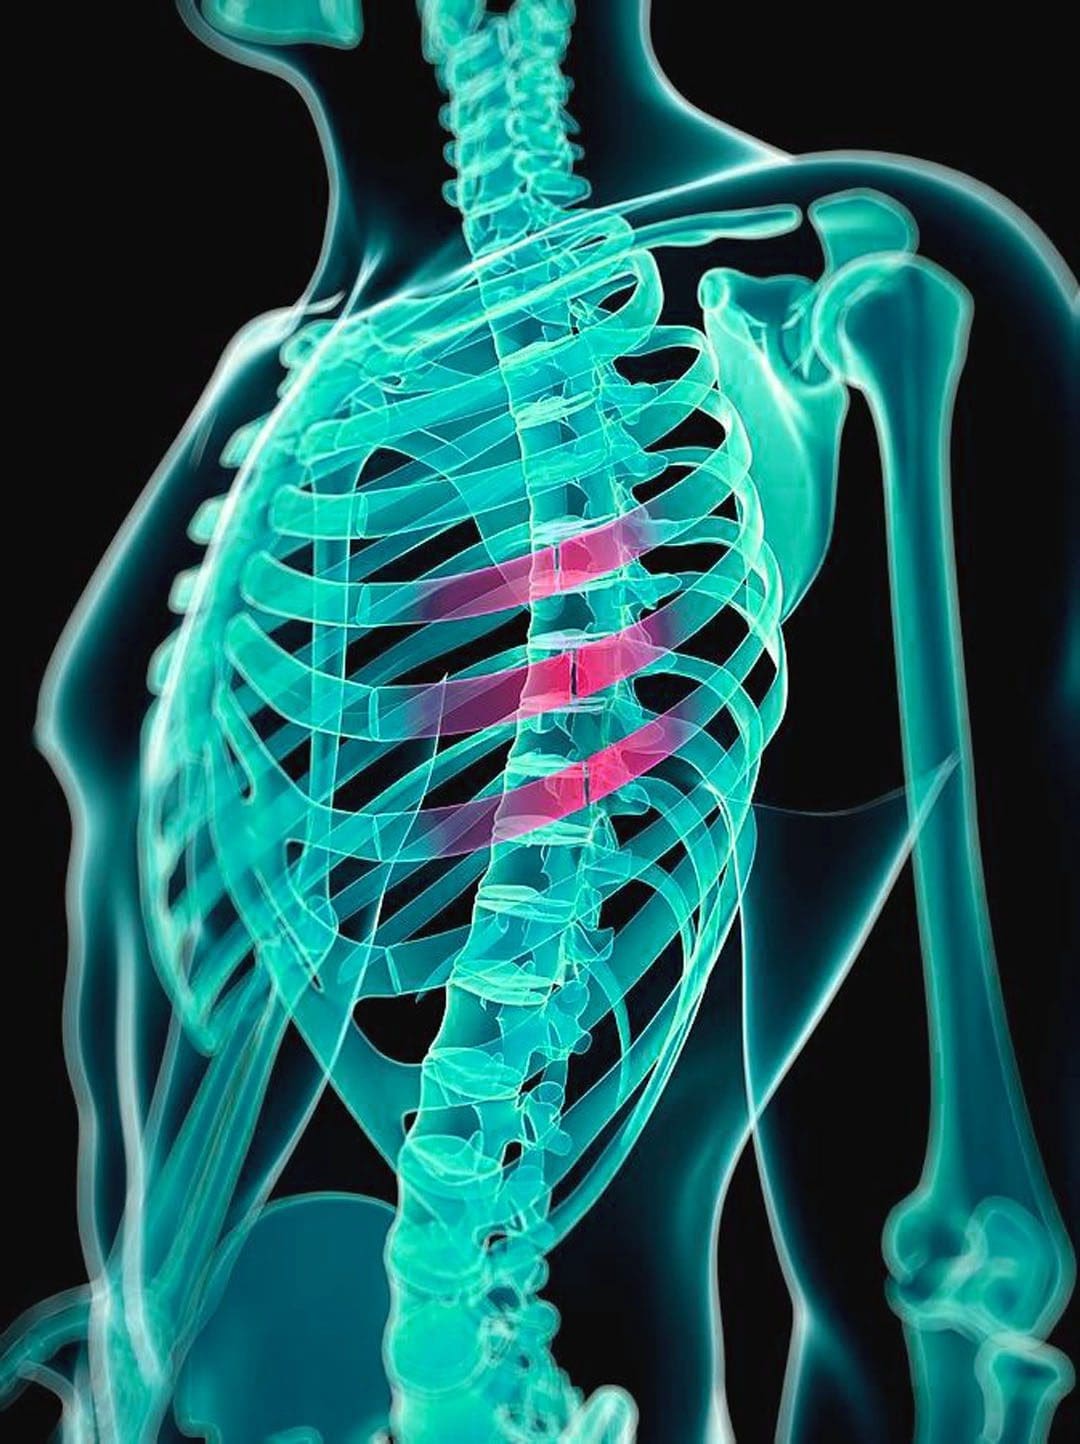 Recognizing the Symptoms of a Cracked Rib